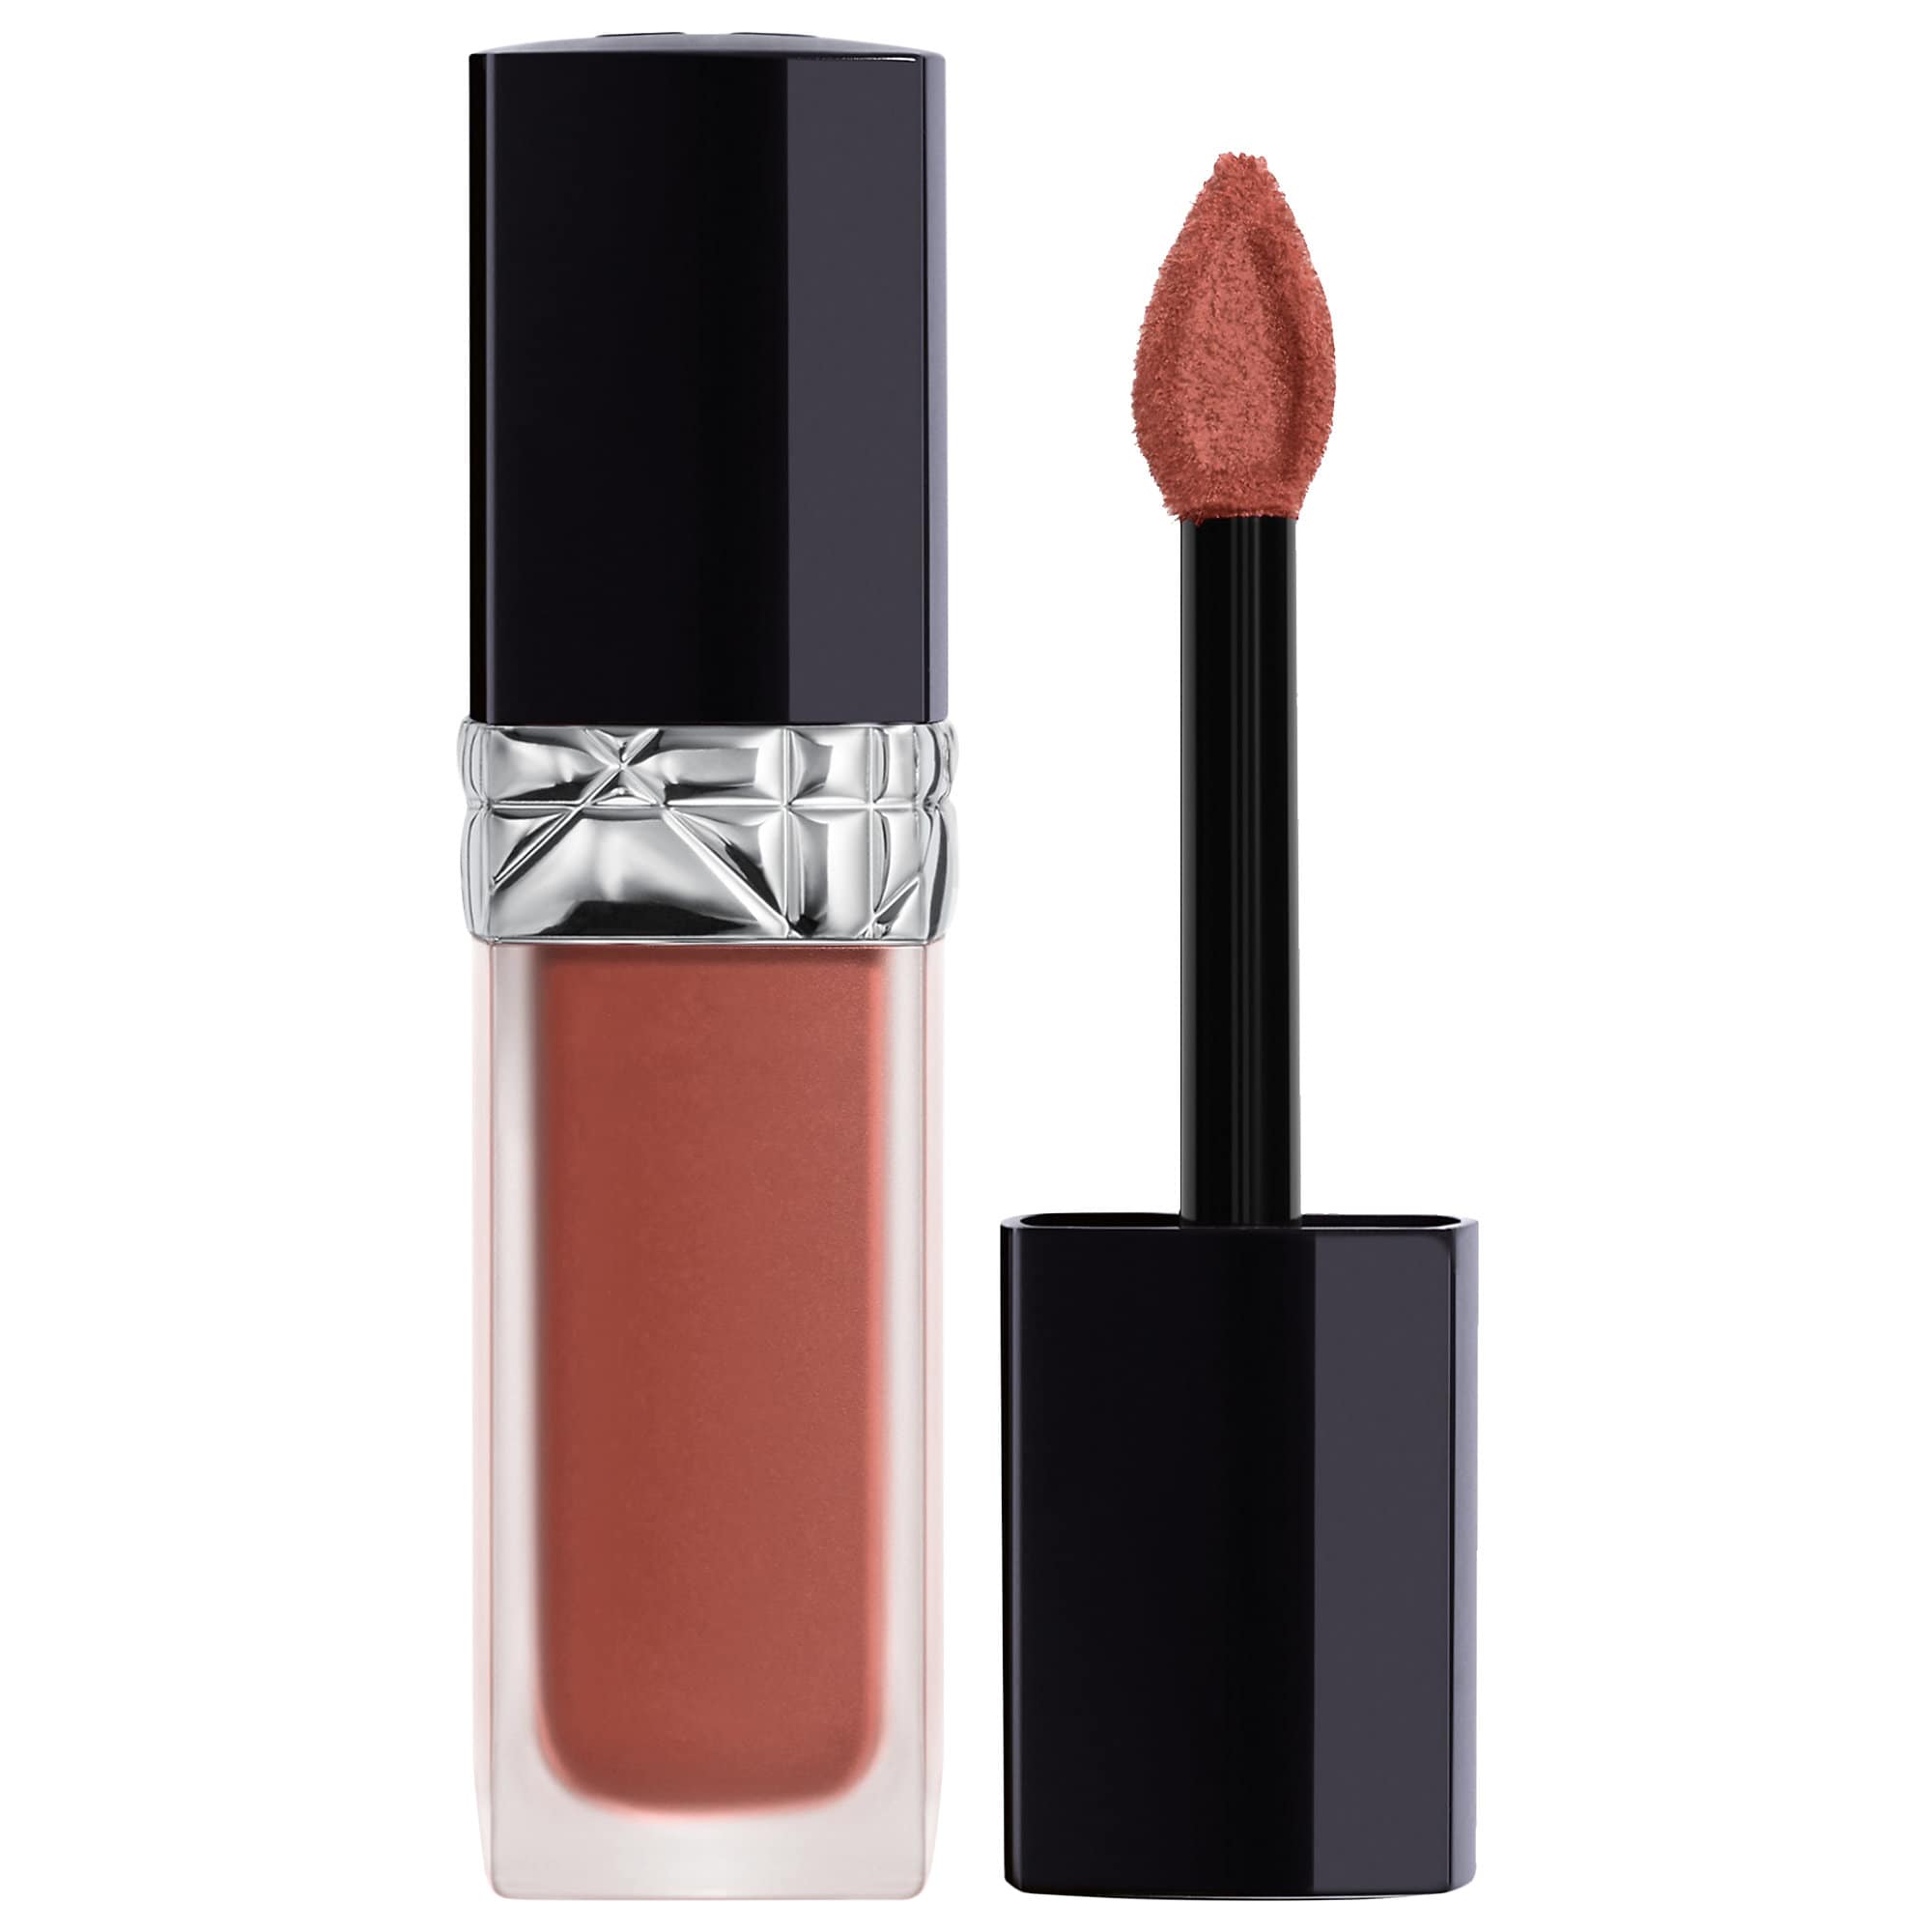 Dior + Rouge Dior Forever Liquid Transfer-Proof Lipstick in Forever Dream